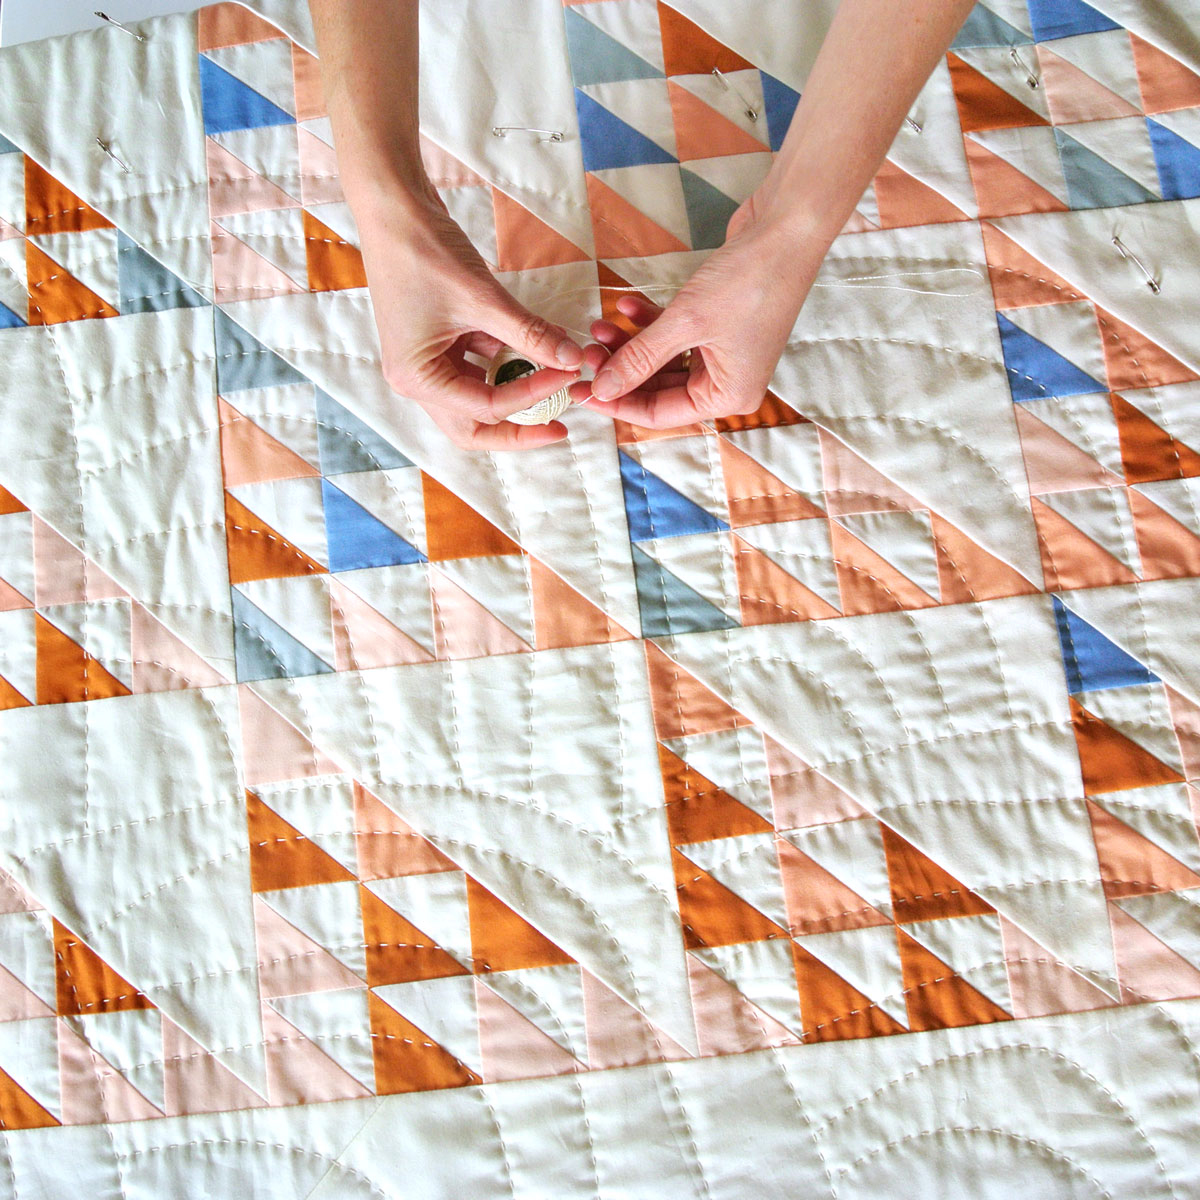 6 Steps for Mindful Making: Hands preparing to hand quilt a Fly Away quilt. #quilting suzyquilts.com